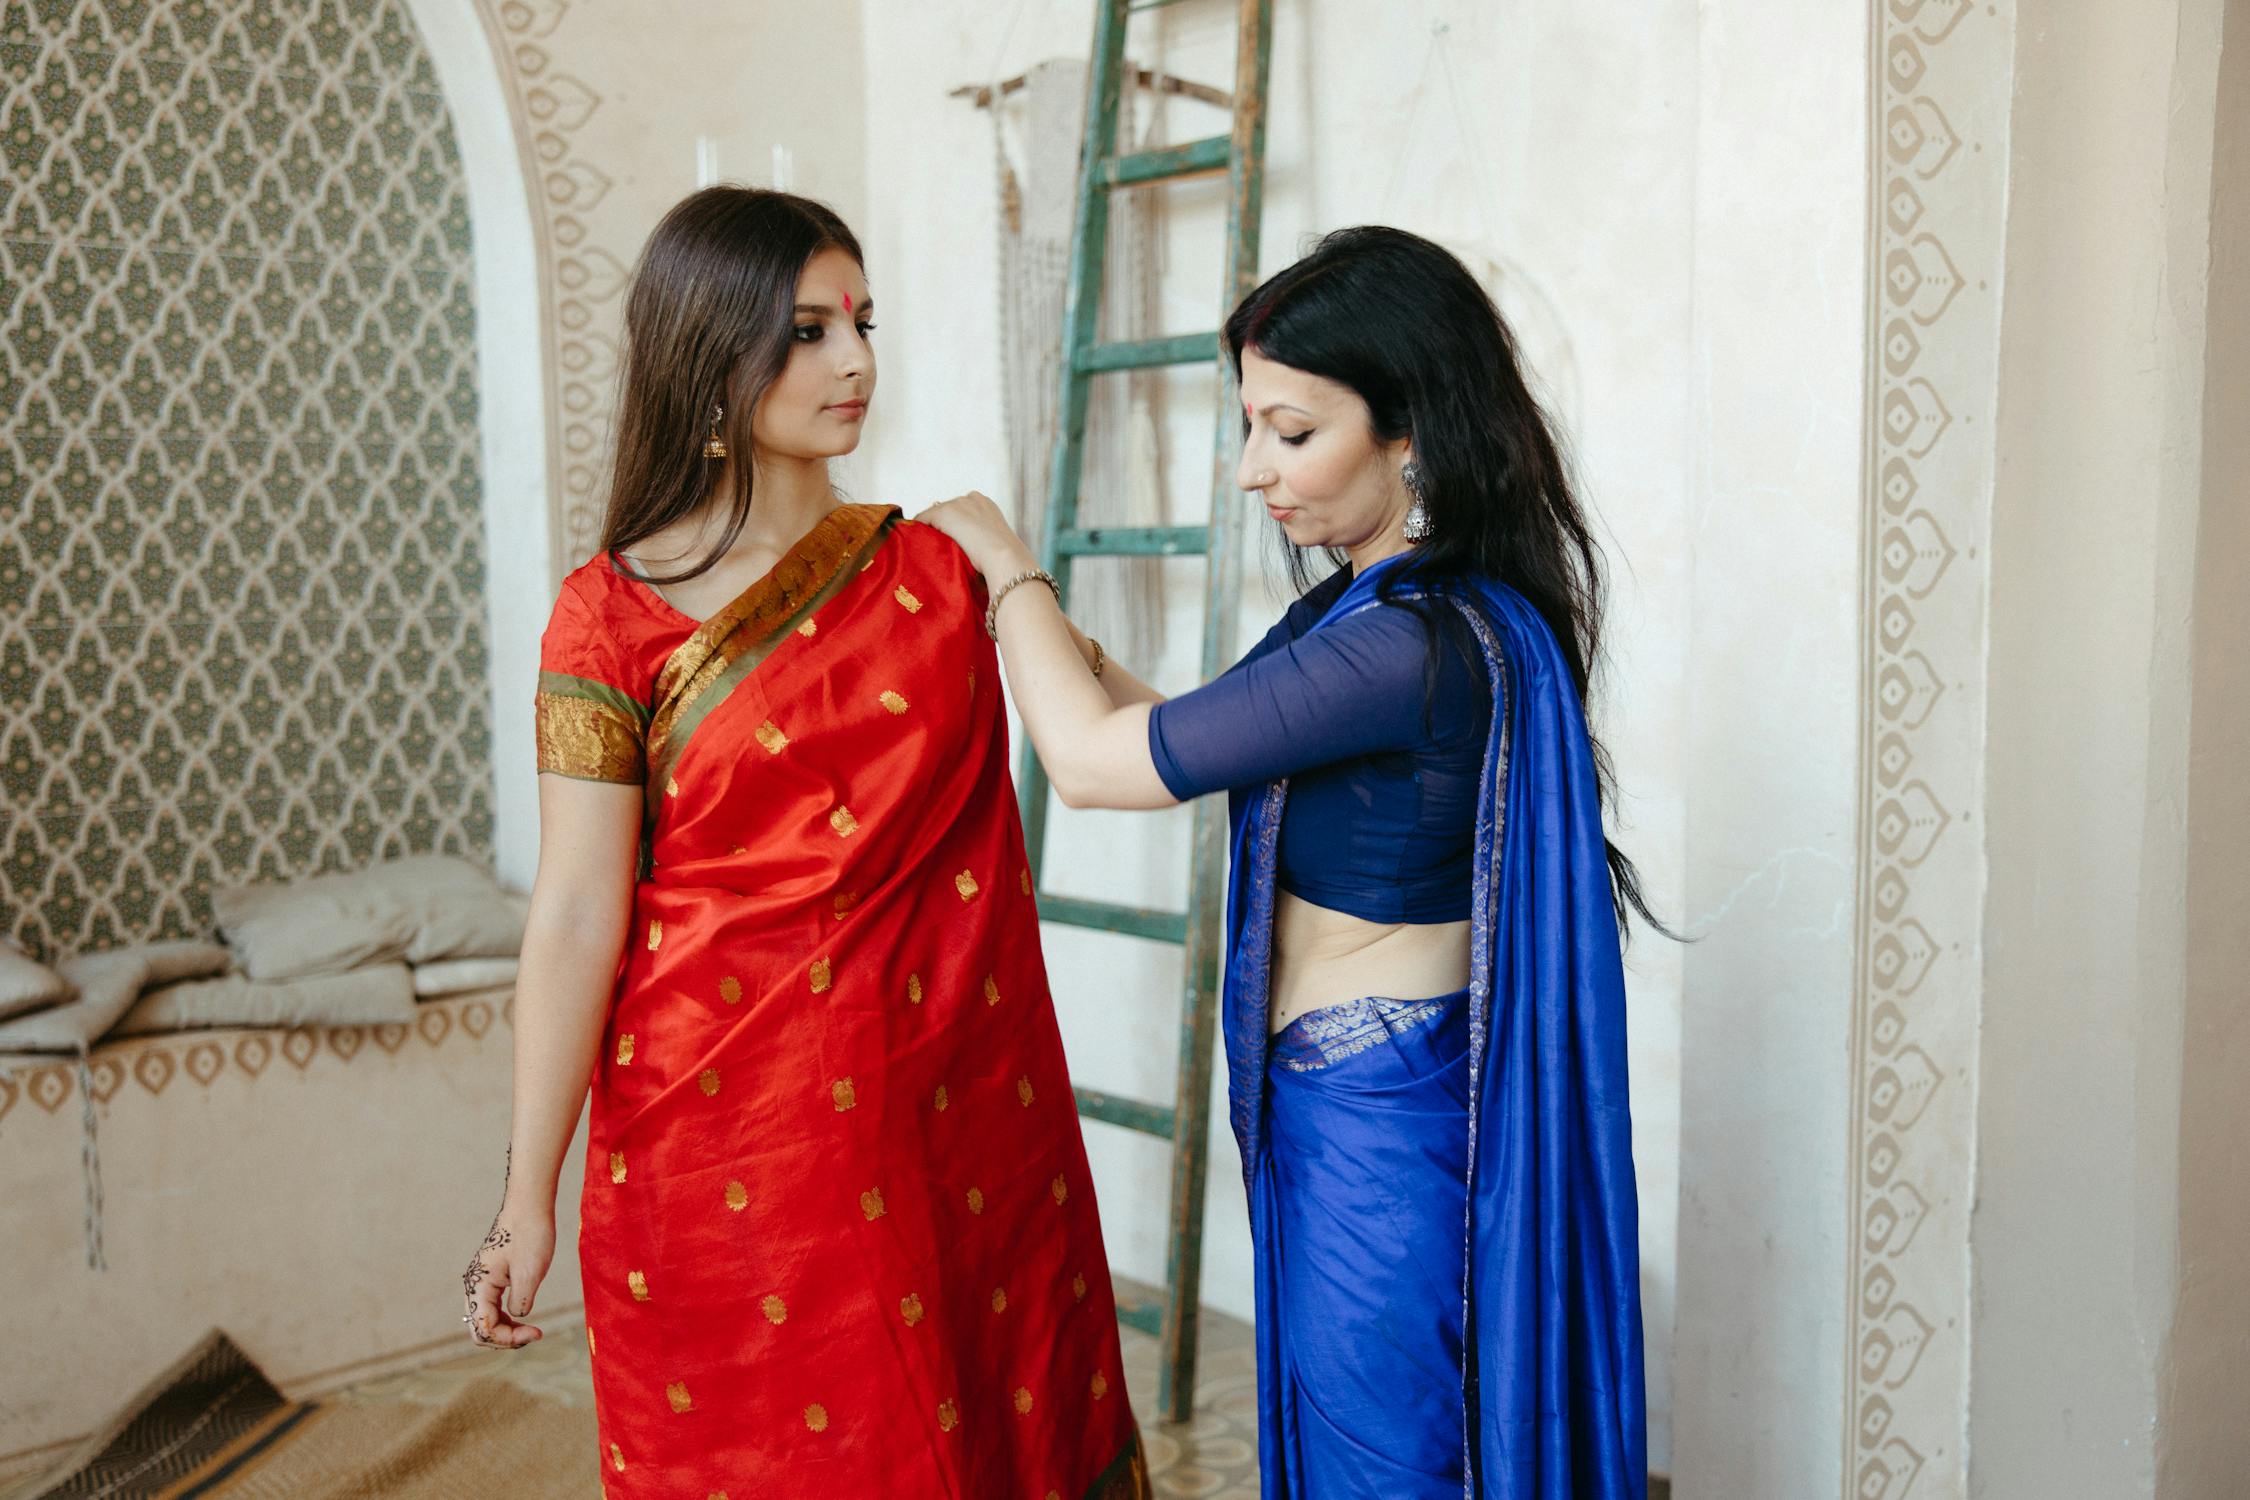 Indian Lady Photo by  Anastasia  Shuraeva from Pexels: https://www.pexels.com/photo/women-putting-on-a-red-shawl-8750027/